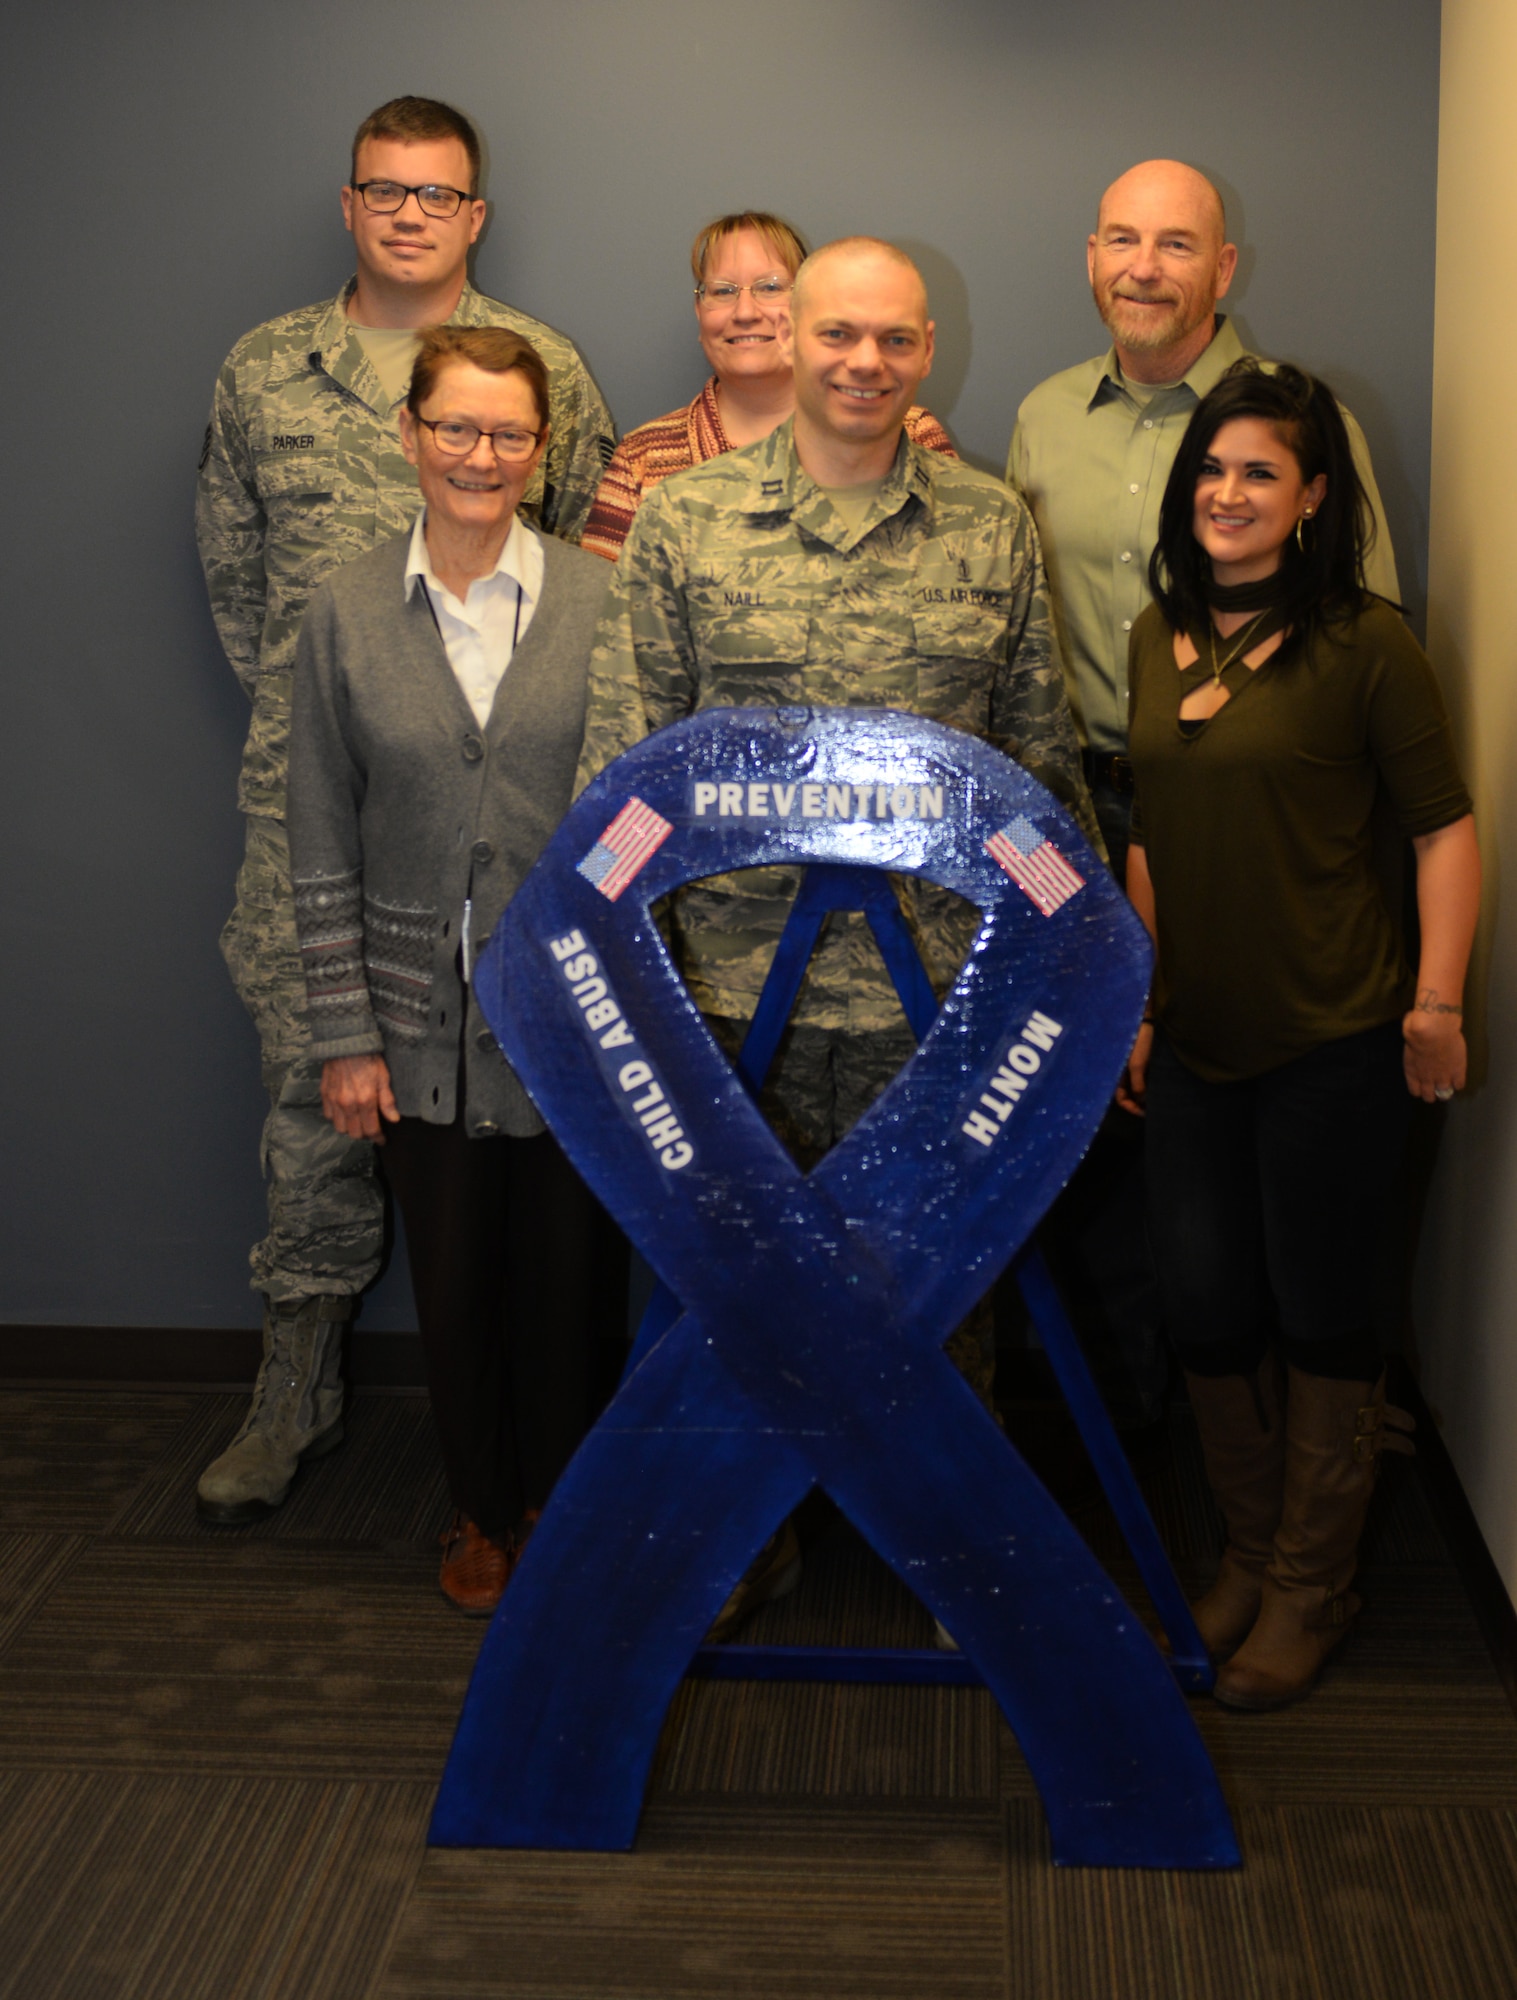 Members of the Ellsworth Air Force Base Family Advocacy Program stand next to a ribbon promoting child abuse awareness, Nov. 8, 2017. The program runs counseling, outreach, new parent support and Family Advocacy Strength-Based Therapy to empower Air Force families. (U.S. Air Force photo by Airman 1st Class Thomas Karol)